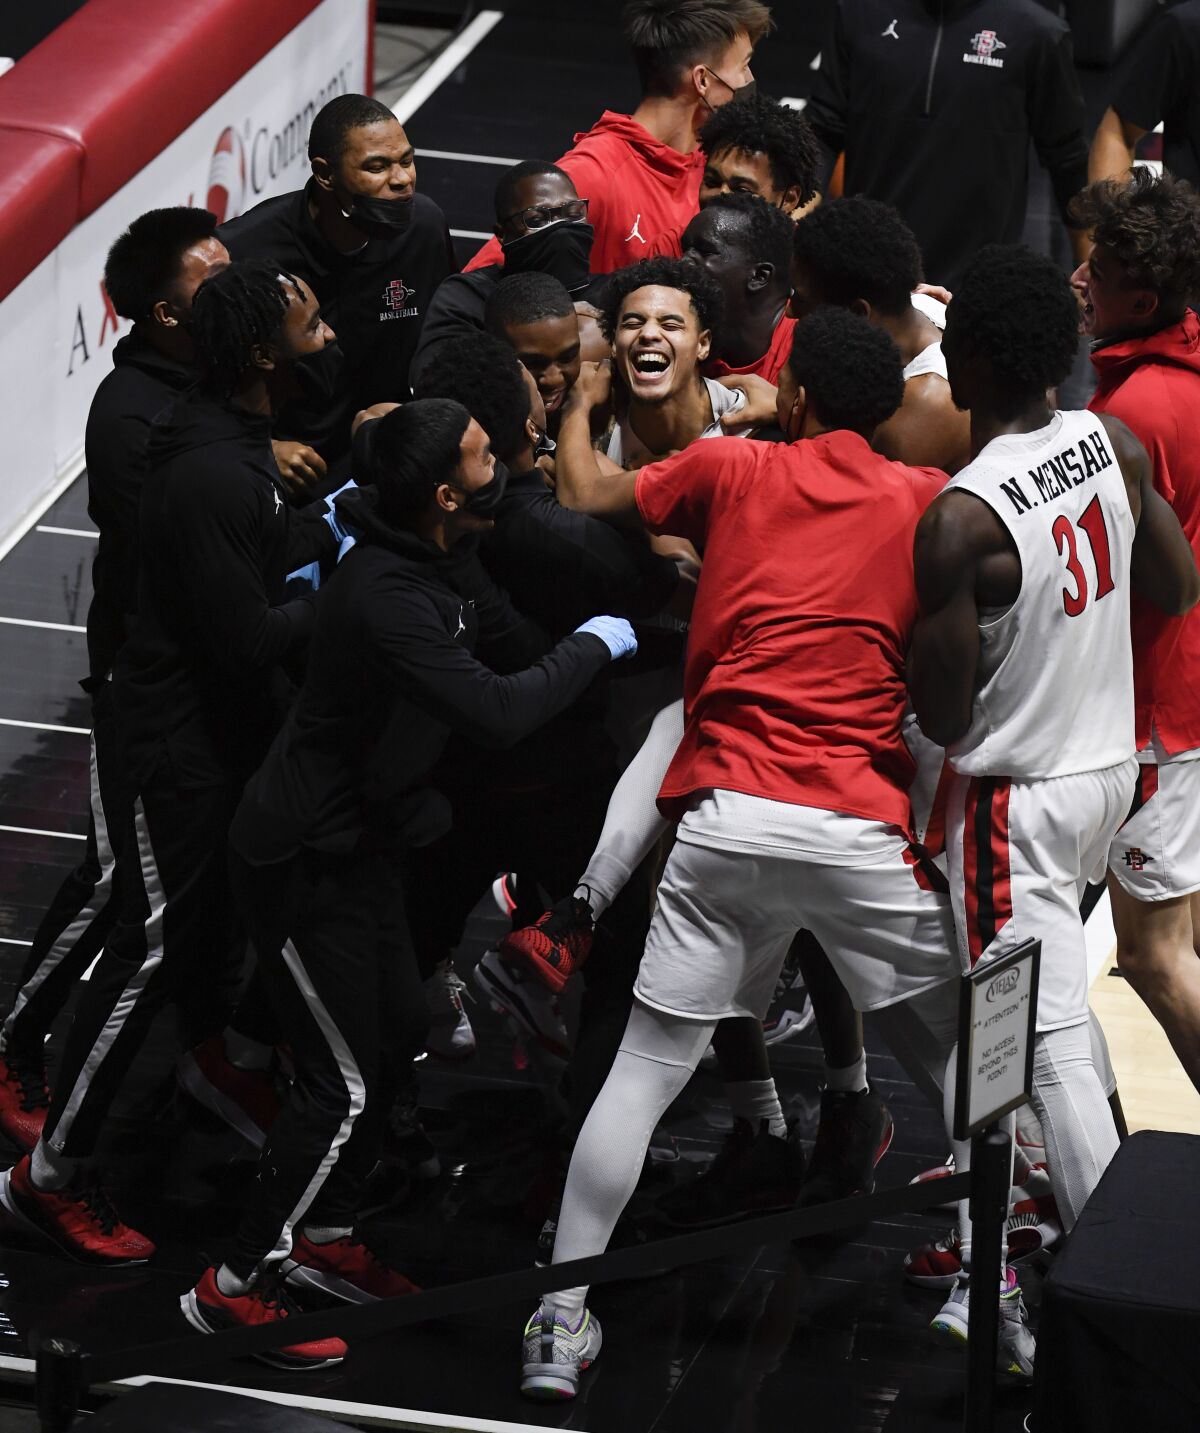 SDSU guard Trey Pulliam (center) is congratulated by teammates after scoring the winning basket against Nevada.